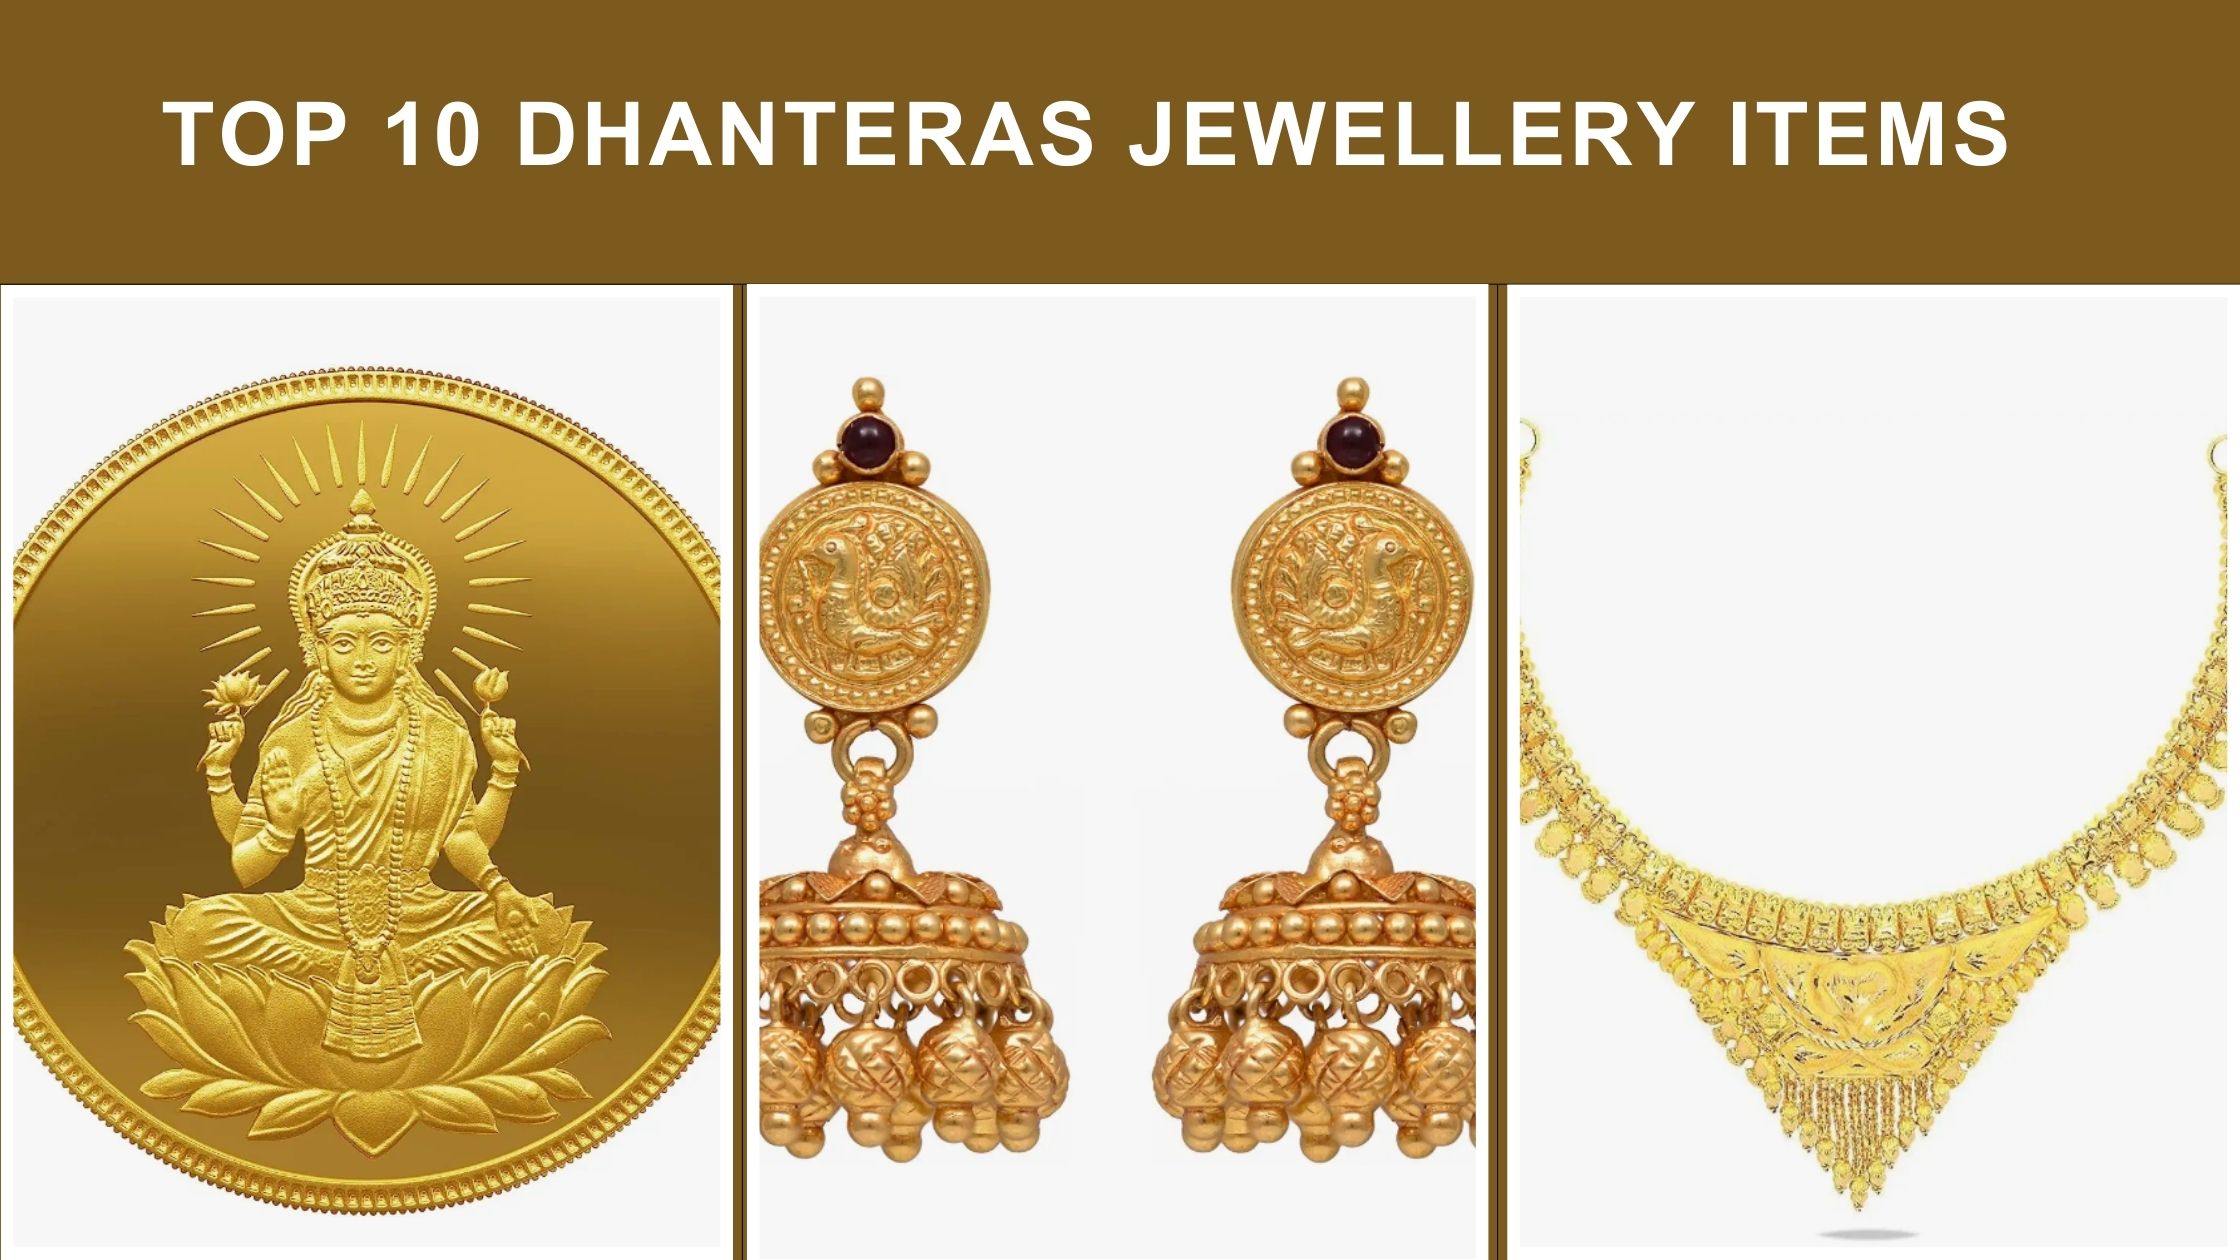 Top 10 Dhanteras Jewellery Items Shopping Ideas (2)